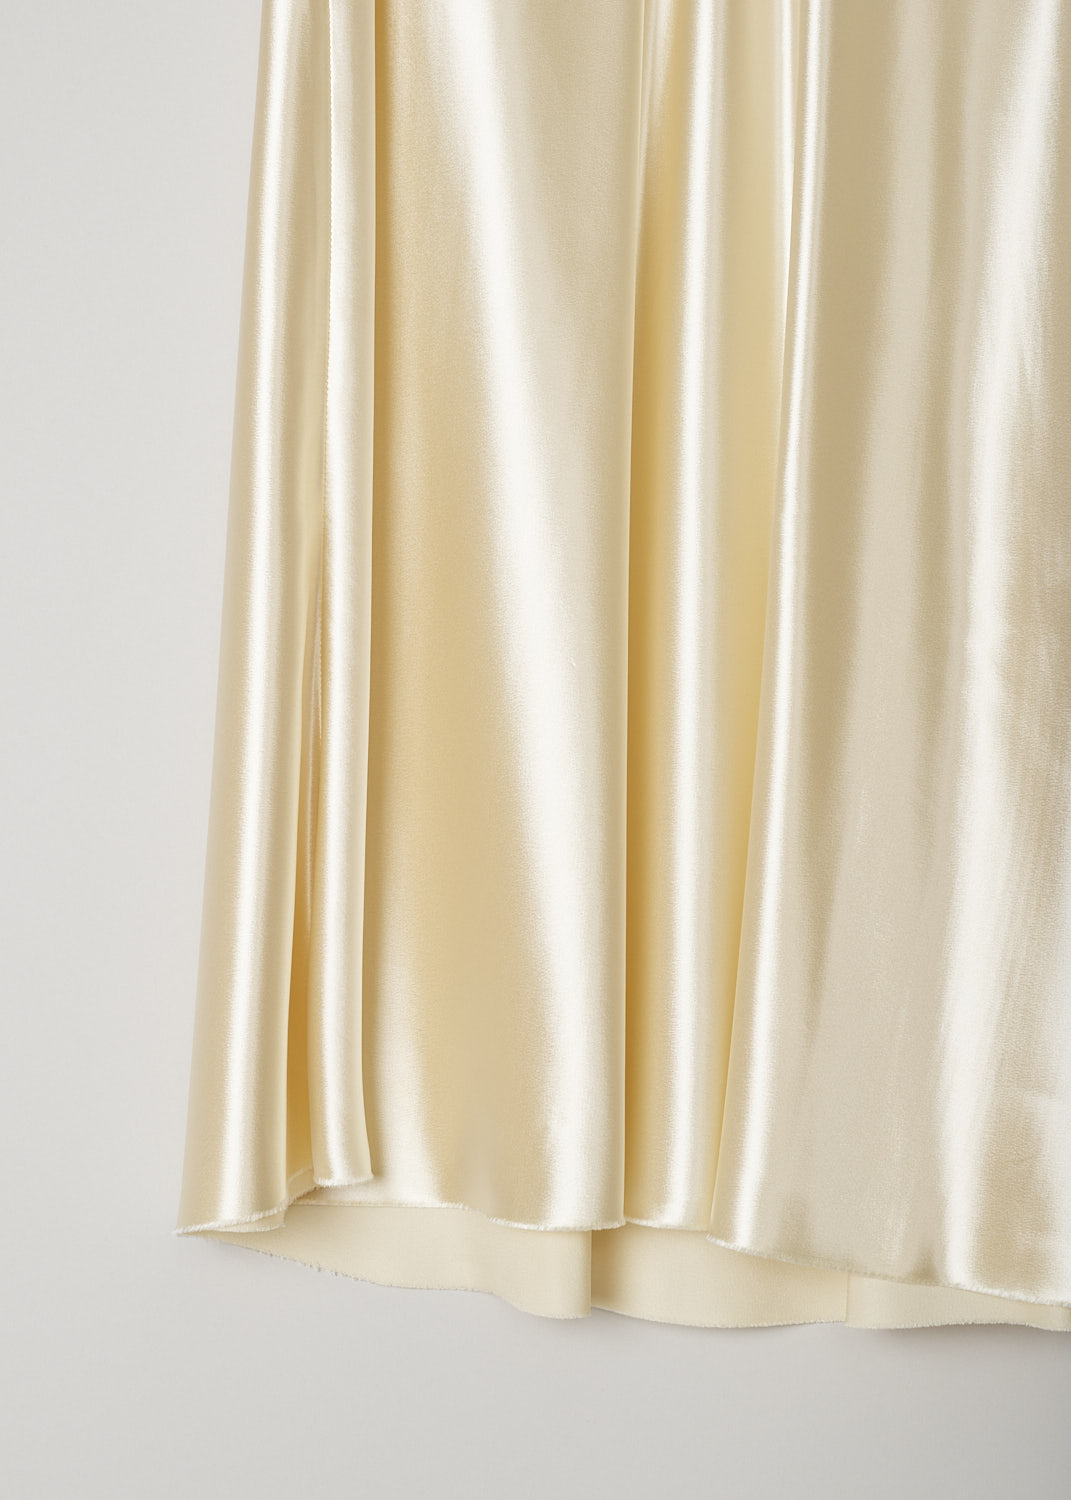 THE ROW, SATIN MEDELA SKIRT IN VANILLA, MEDELA_SKIRT_I068WI_723_VANILLA, Beige, White, Detail, This flared vanilla yellow satin skirt has an elasticated waistband and a concealed side zip that functions as the closure option. The skirt has an asymmetrical hemline with a raw finish. 

